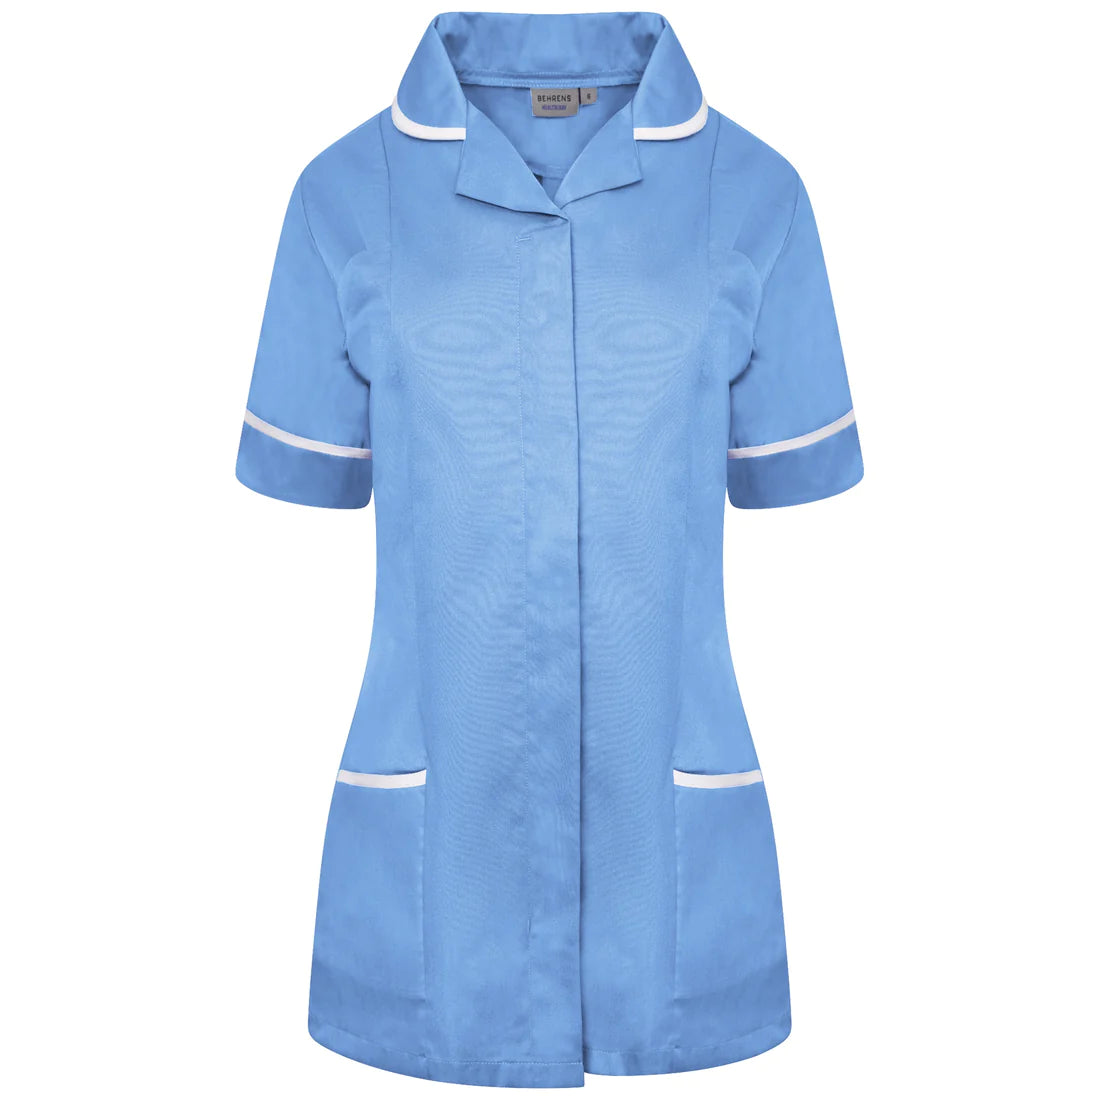 Hospital Blue/White Contrast Ladies Tunic with Round Collar - NCLTPS